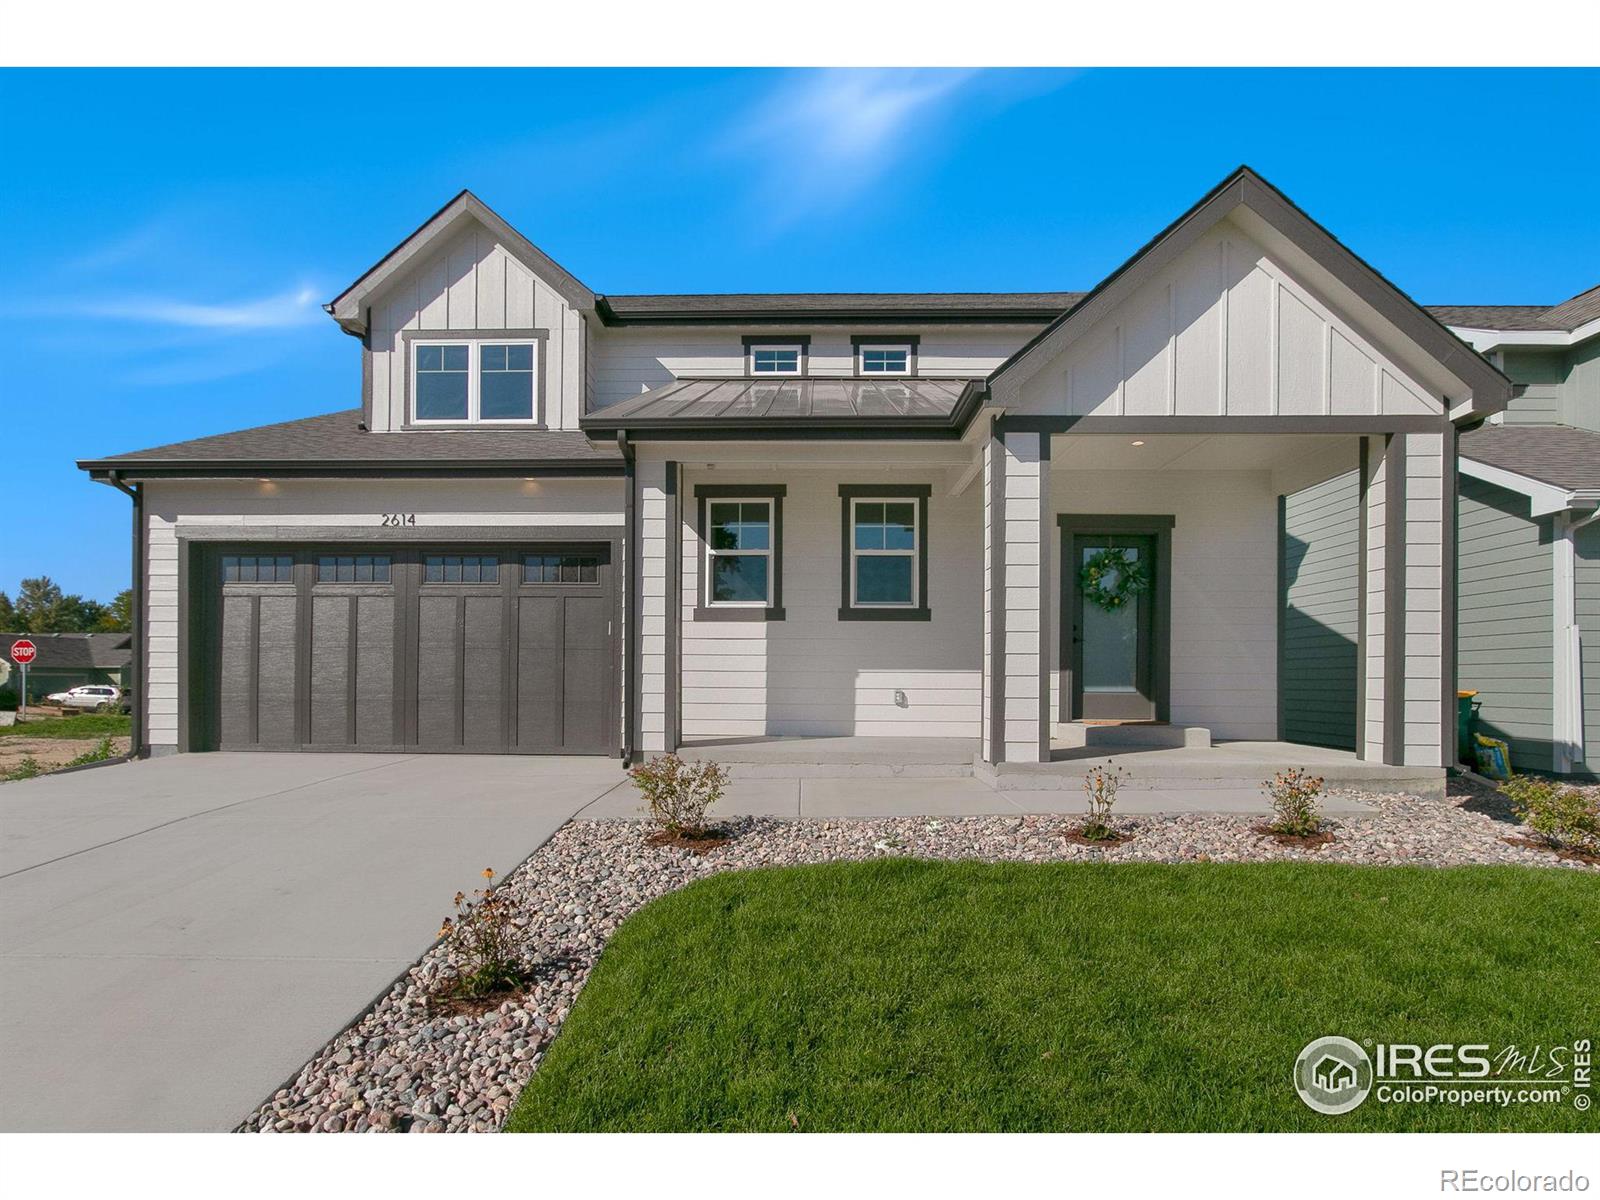 CMA Image for 2614  bartlett drive,Fort Collins, Colorado